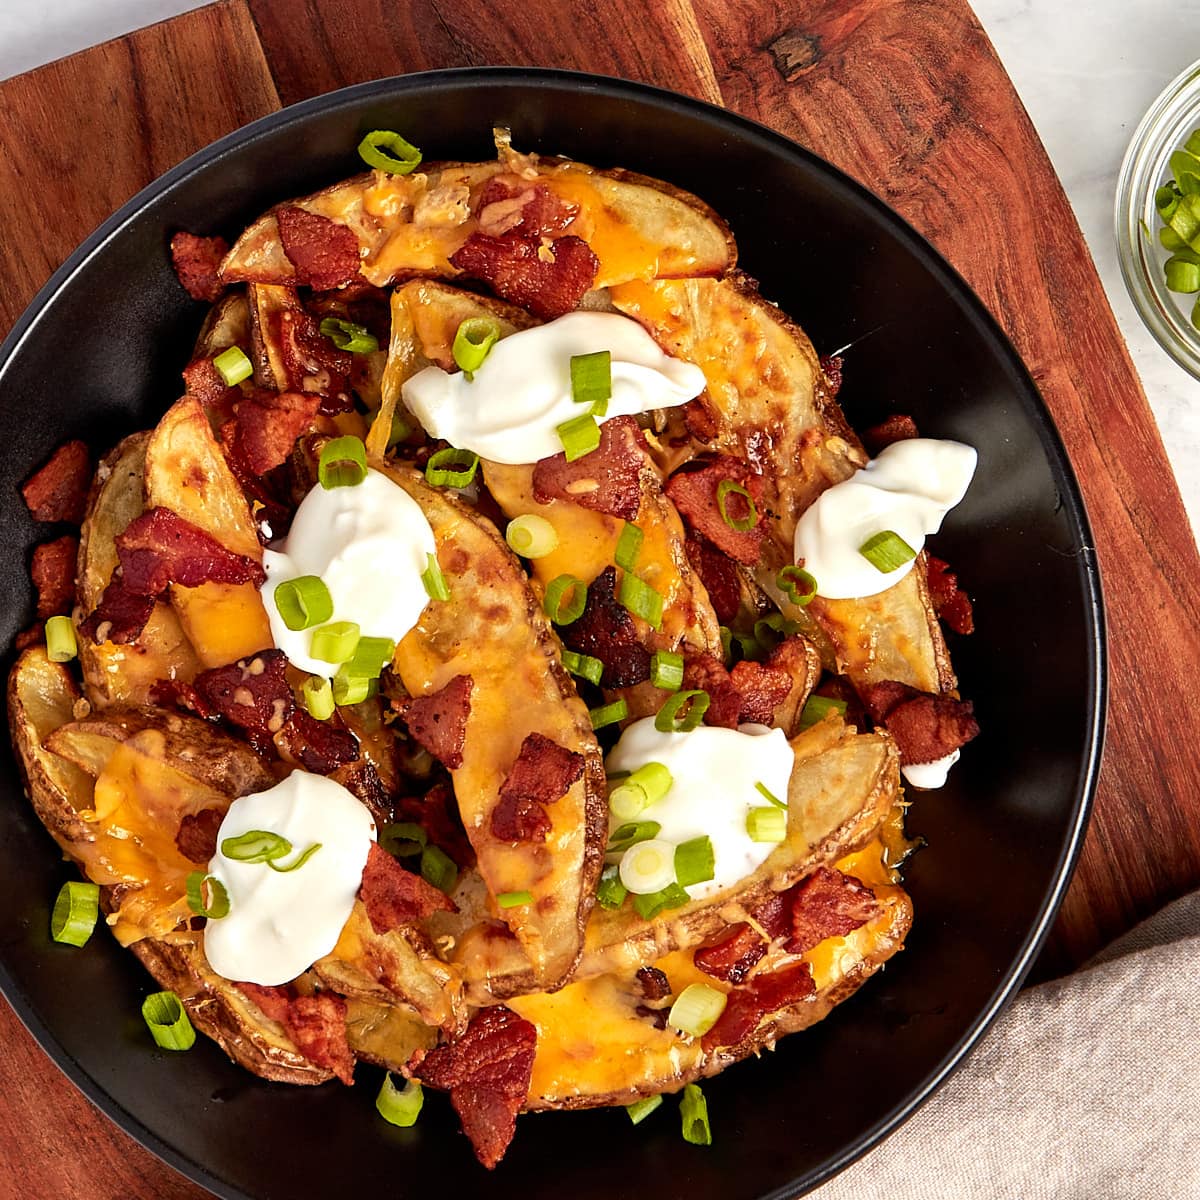 loaded potato wedges in a bowl topped with bacon, cheese, sour cream and chives.